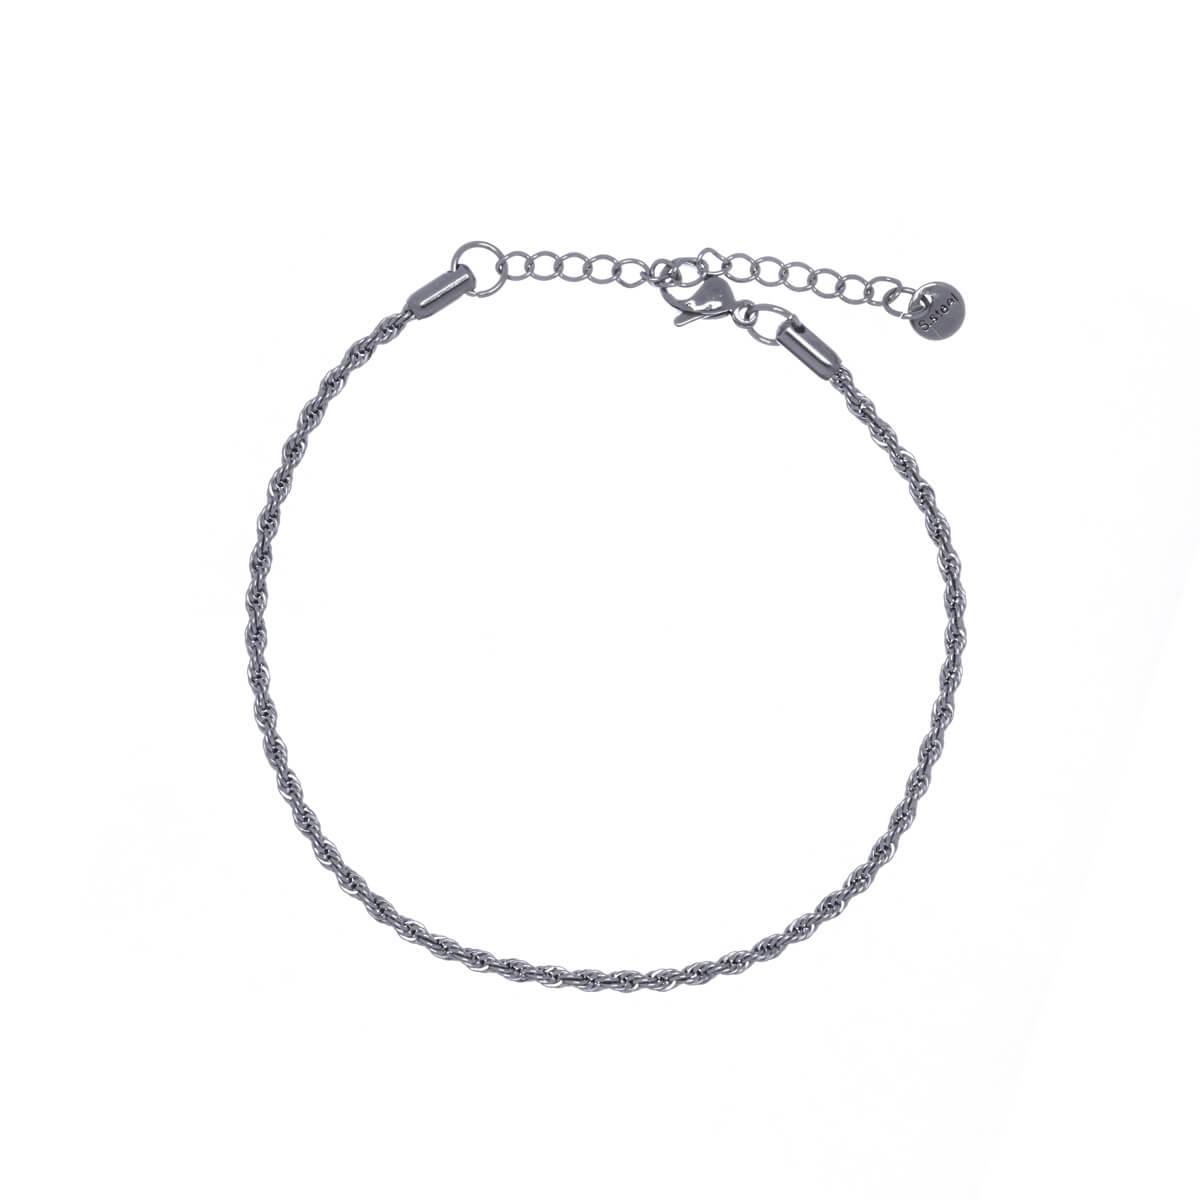 Steel ankle chain Singapore chain (Steel 316L)